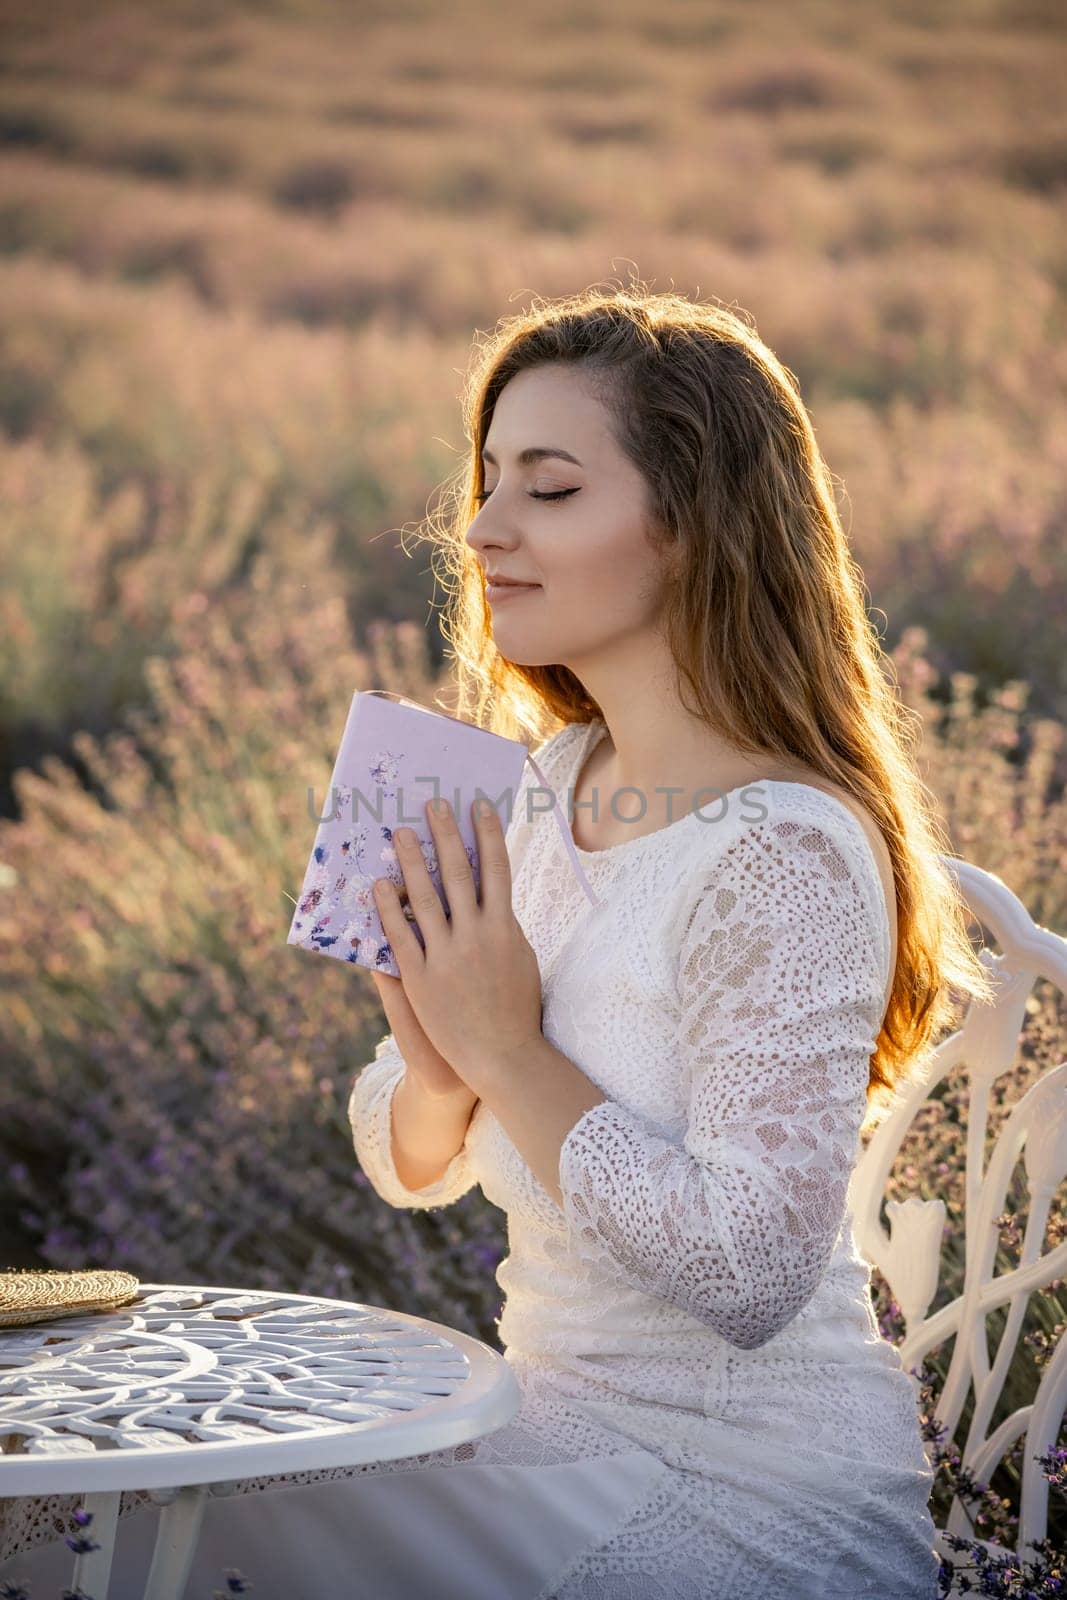 A woman in a white dress is sitting at a table with a book in her lap. She is in a peaceful and relaxed state, possibly reading the book or meditating. The scene is set in a field of lavender